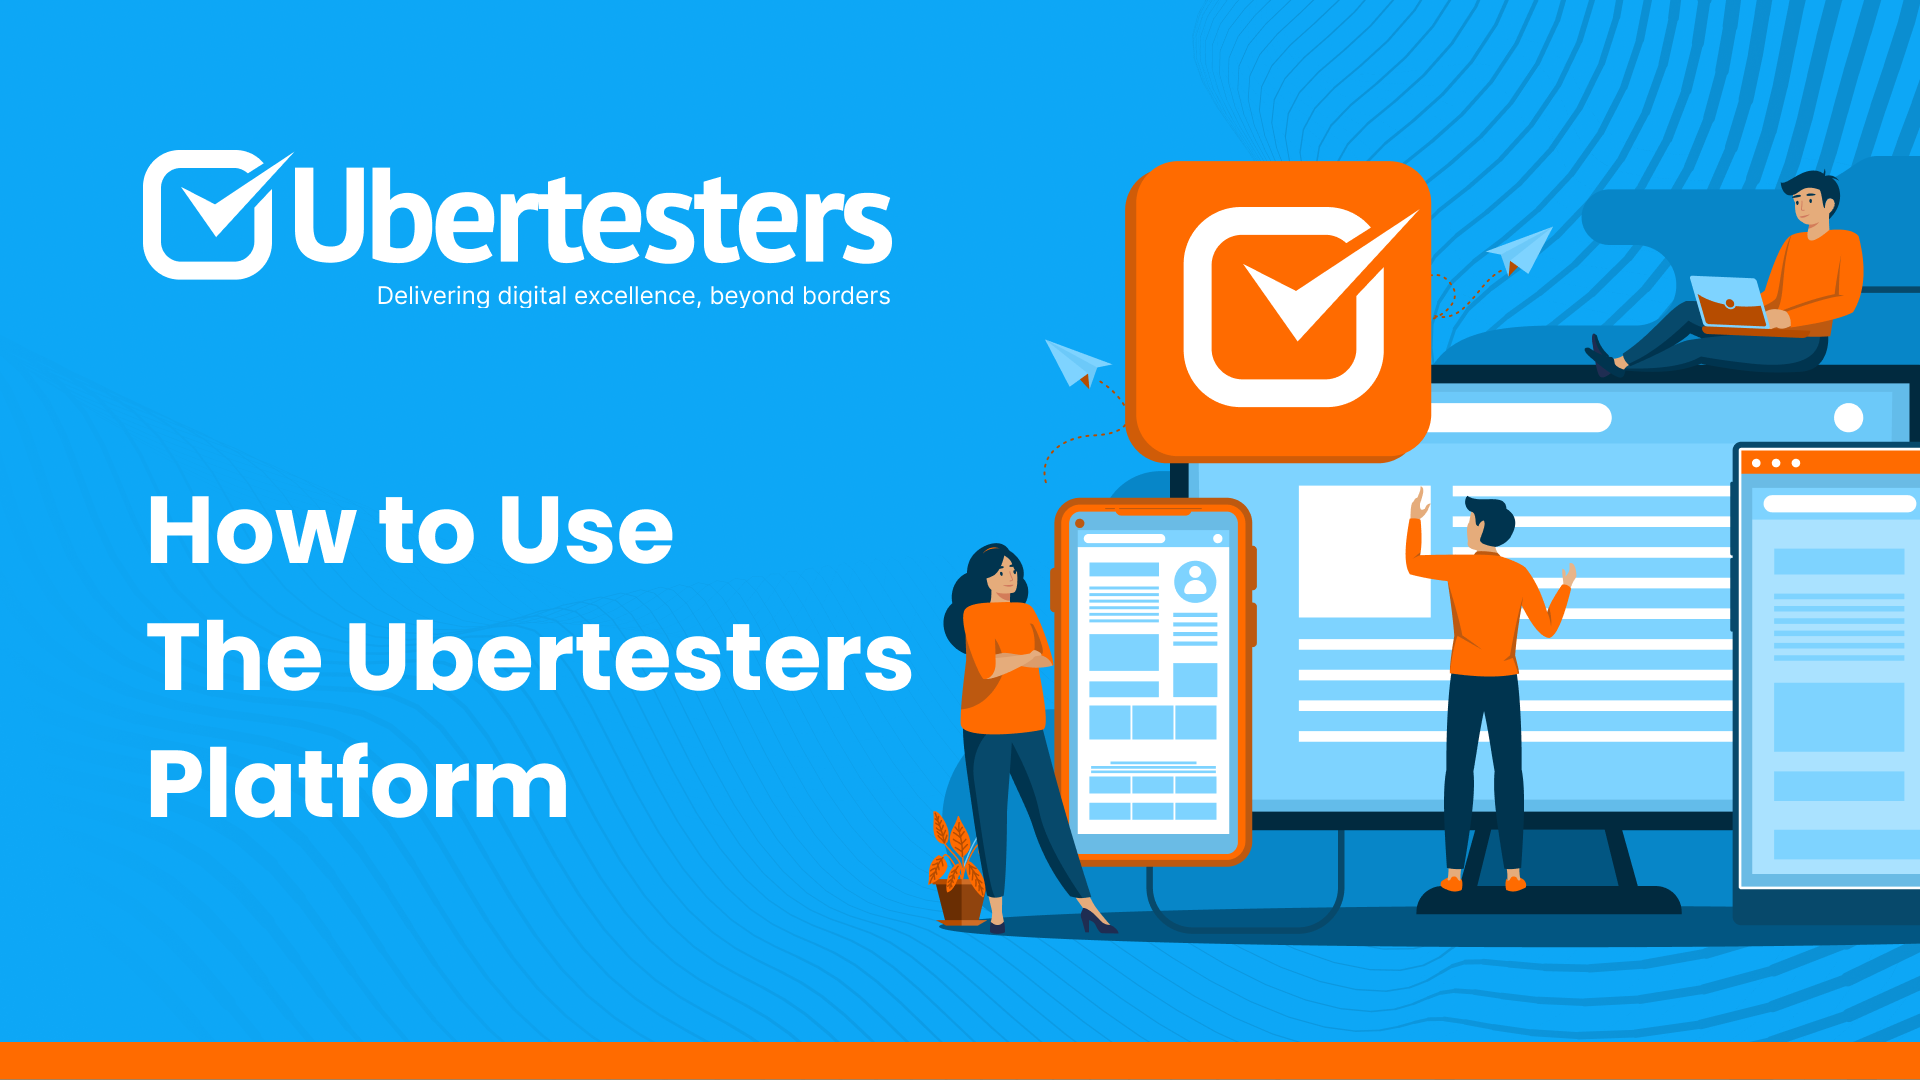 How to Use the Ubertesters Platform